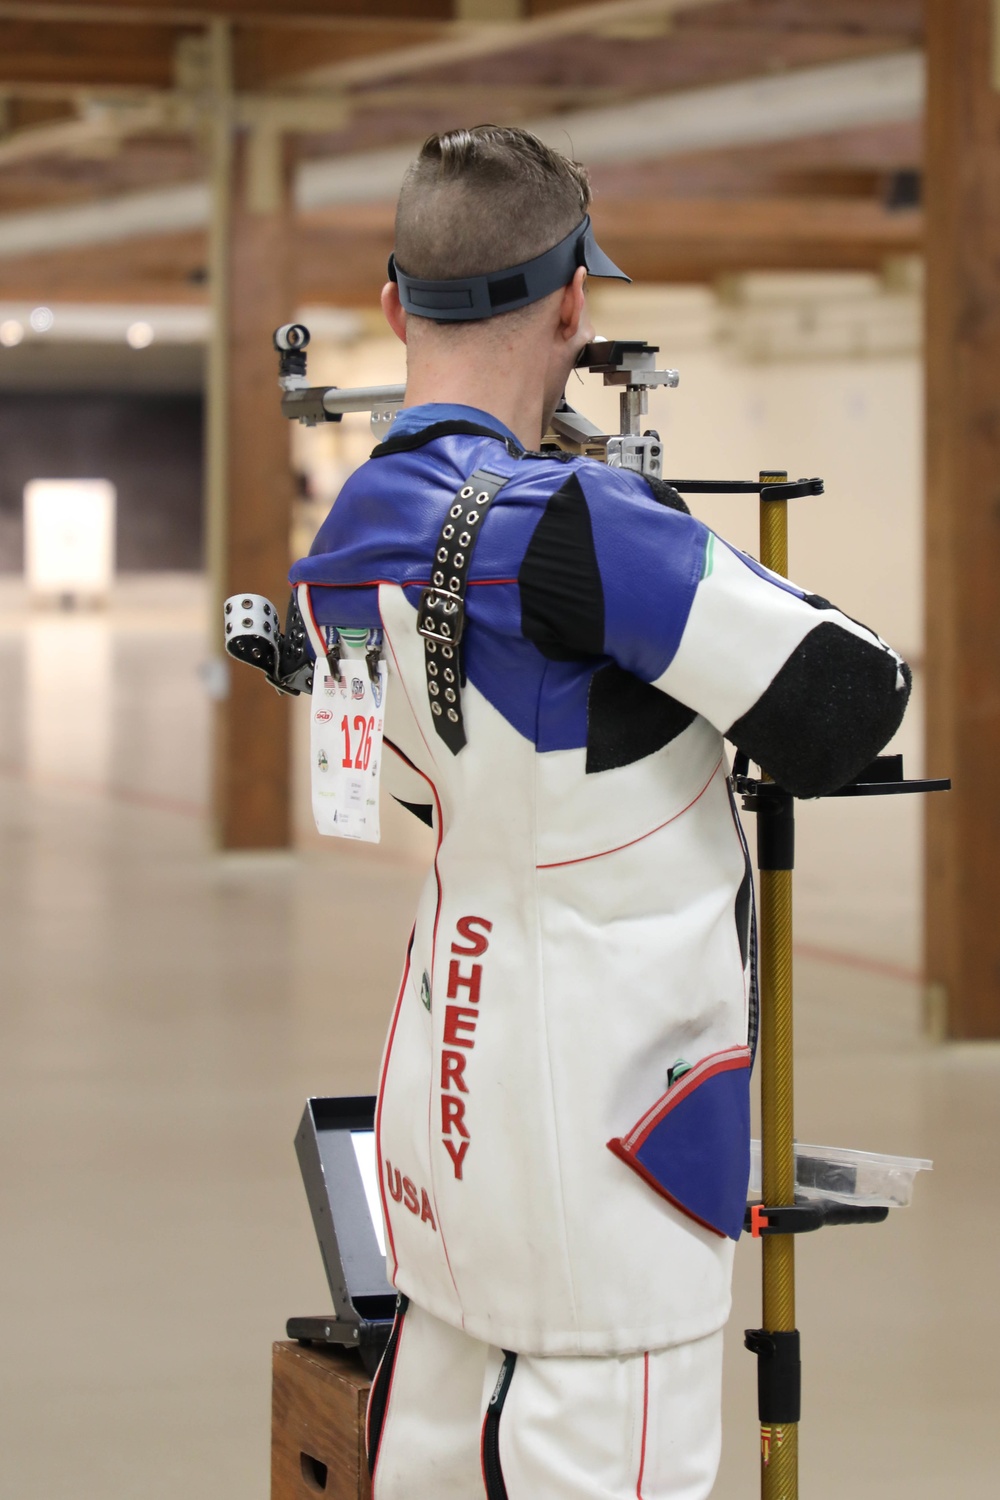 U.S. Army Soldiers to compete in ISSF Rifle World Cup